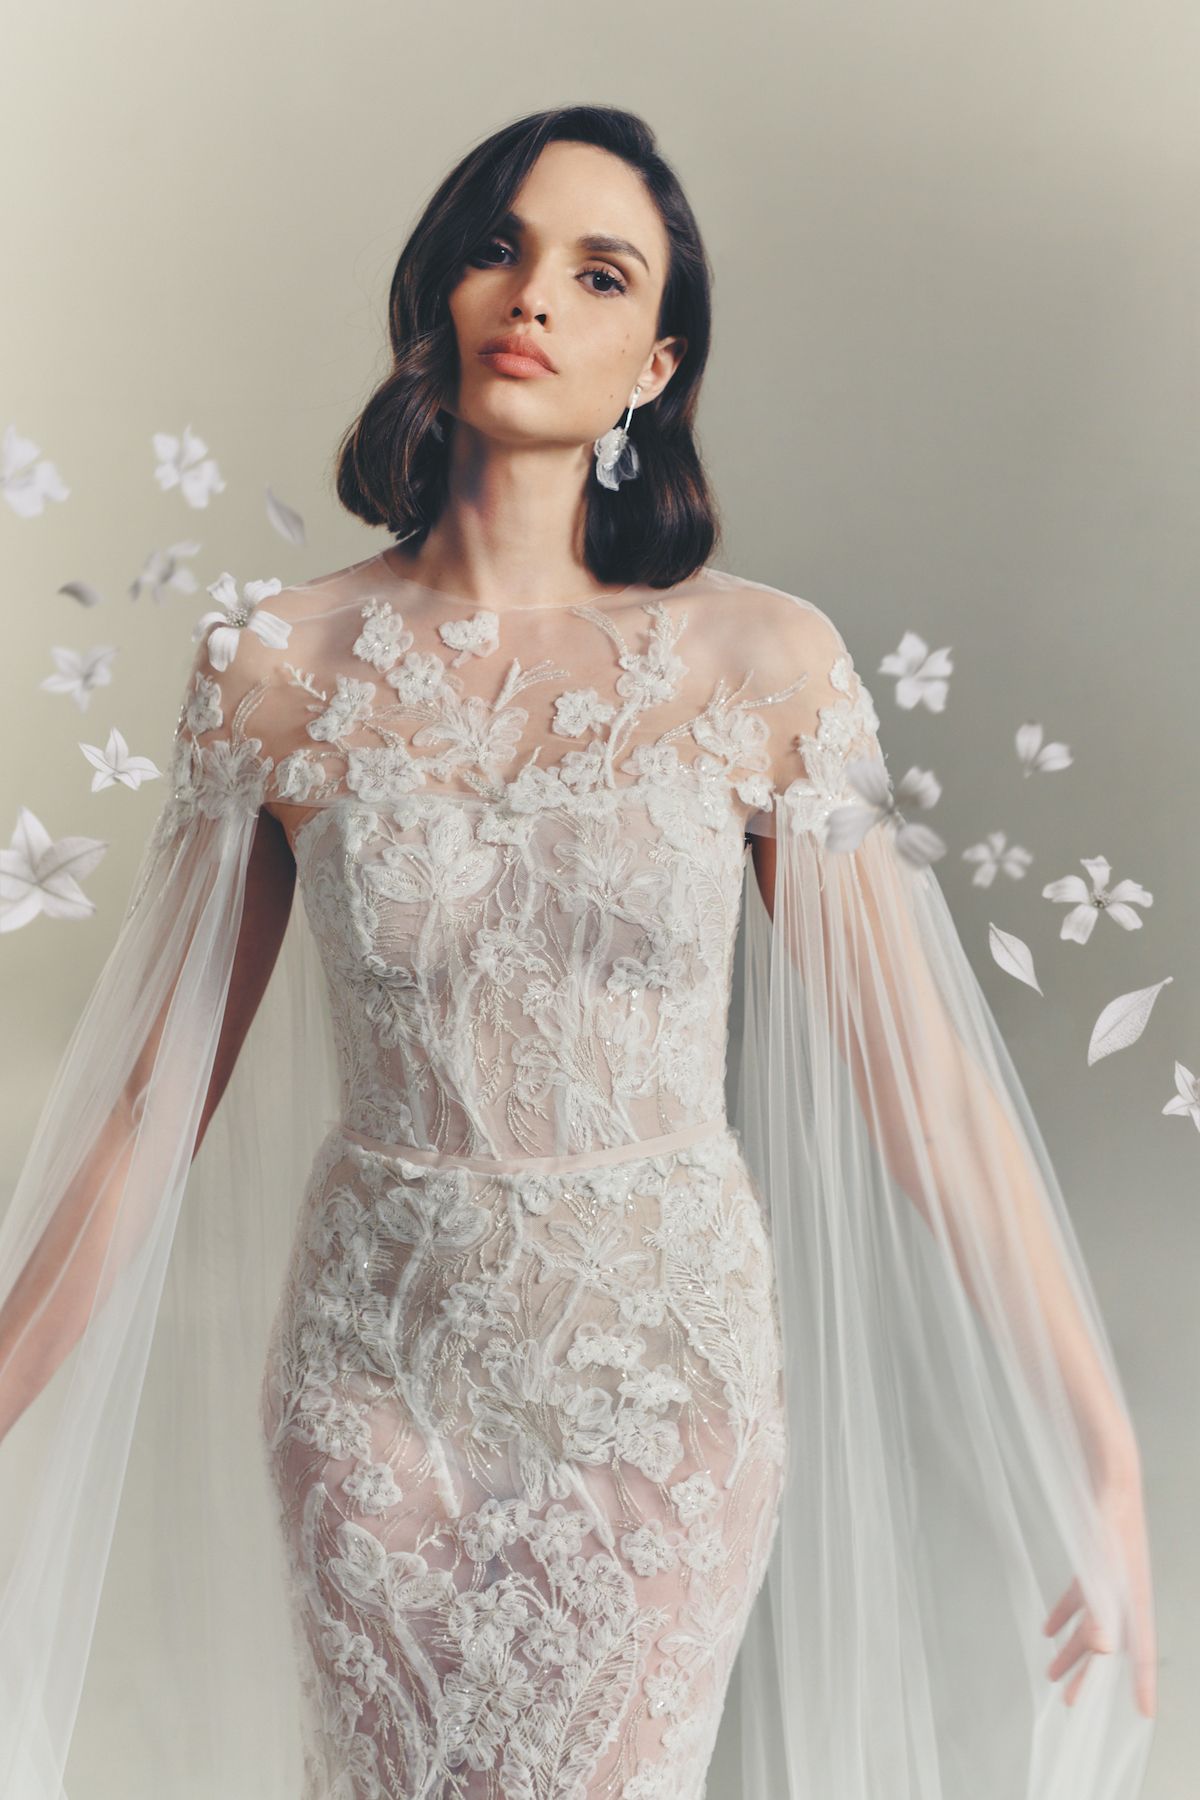 An elegant wedding dress with embroidered floral patterns